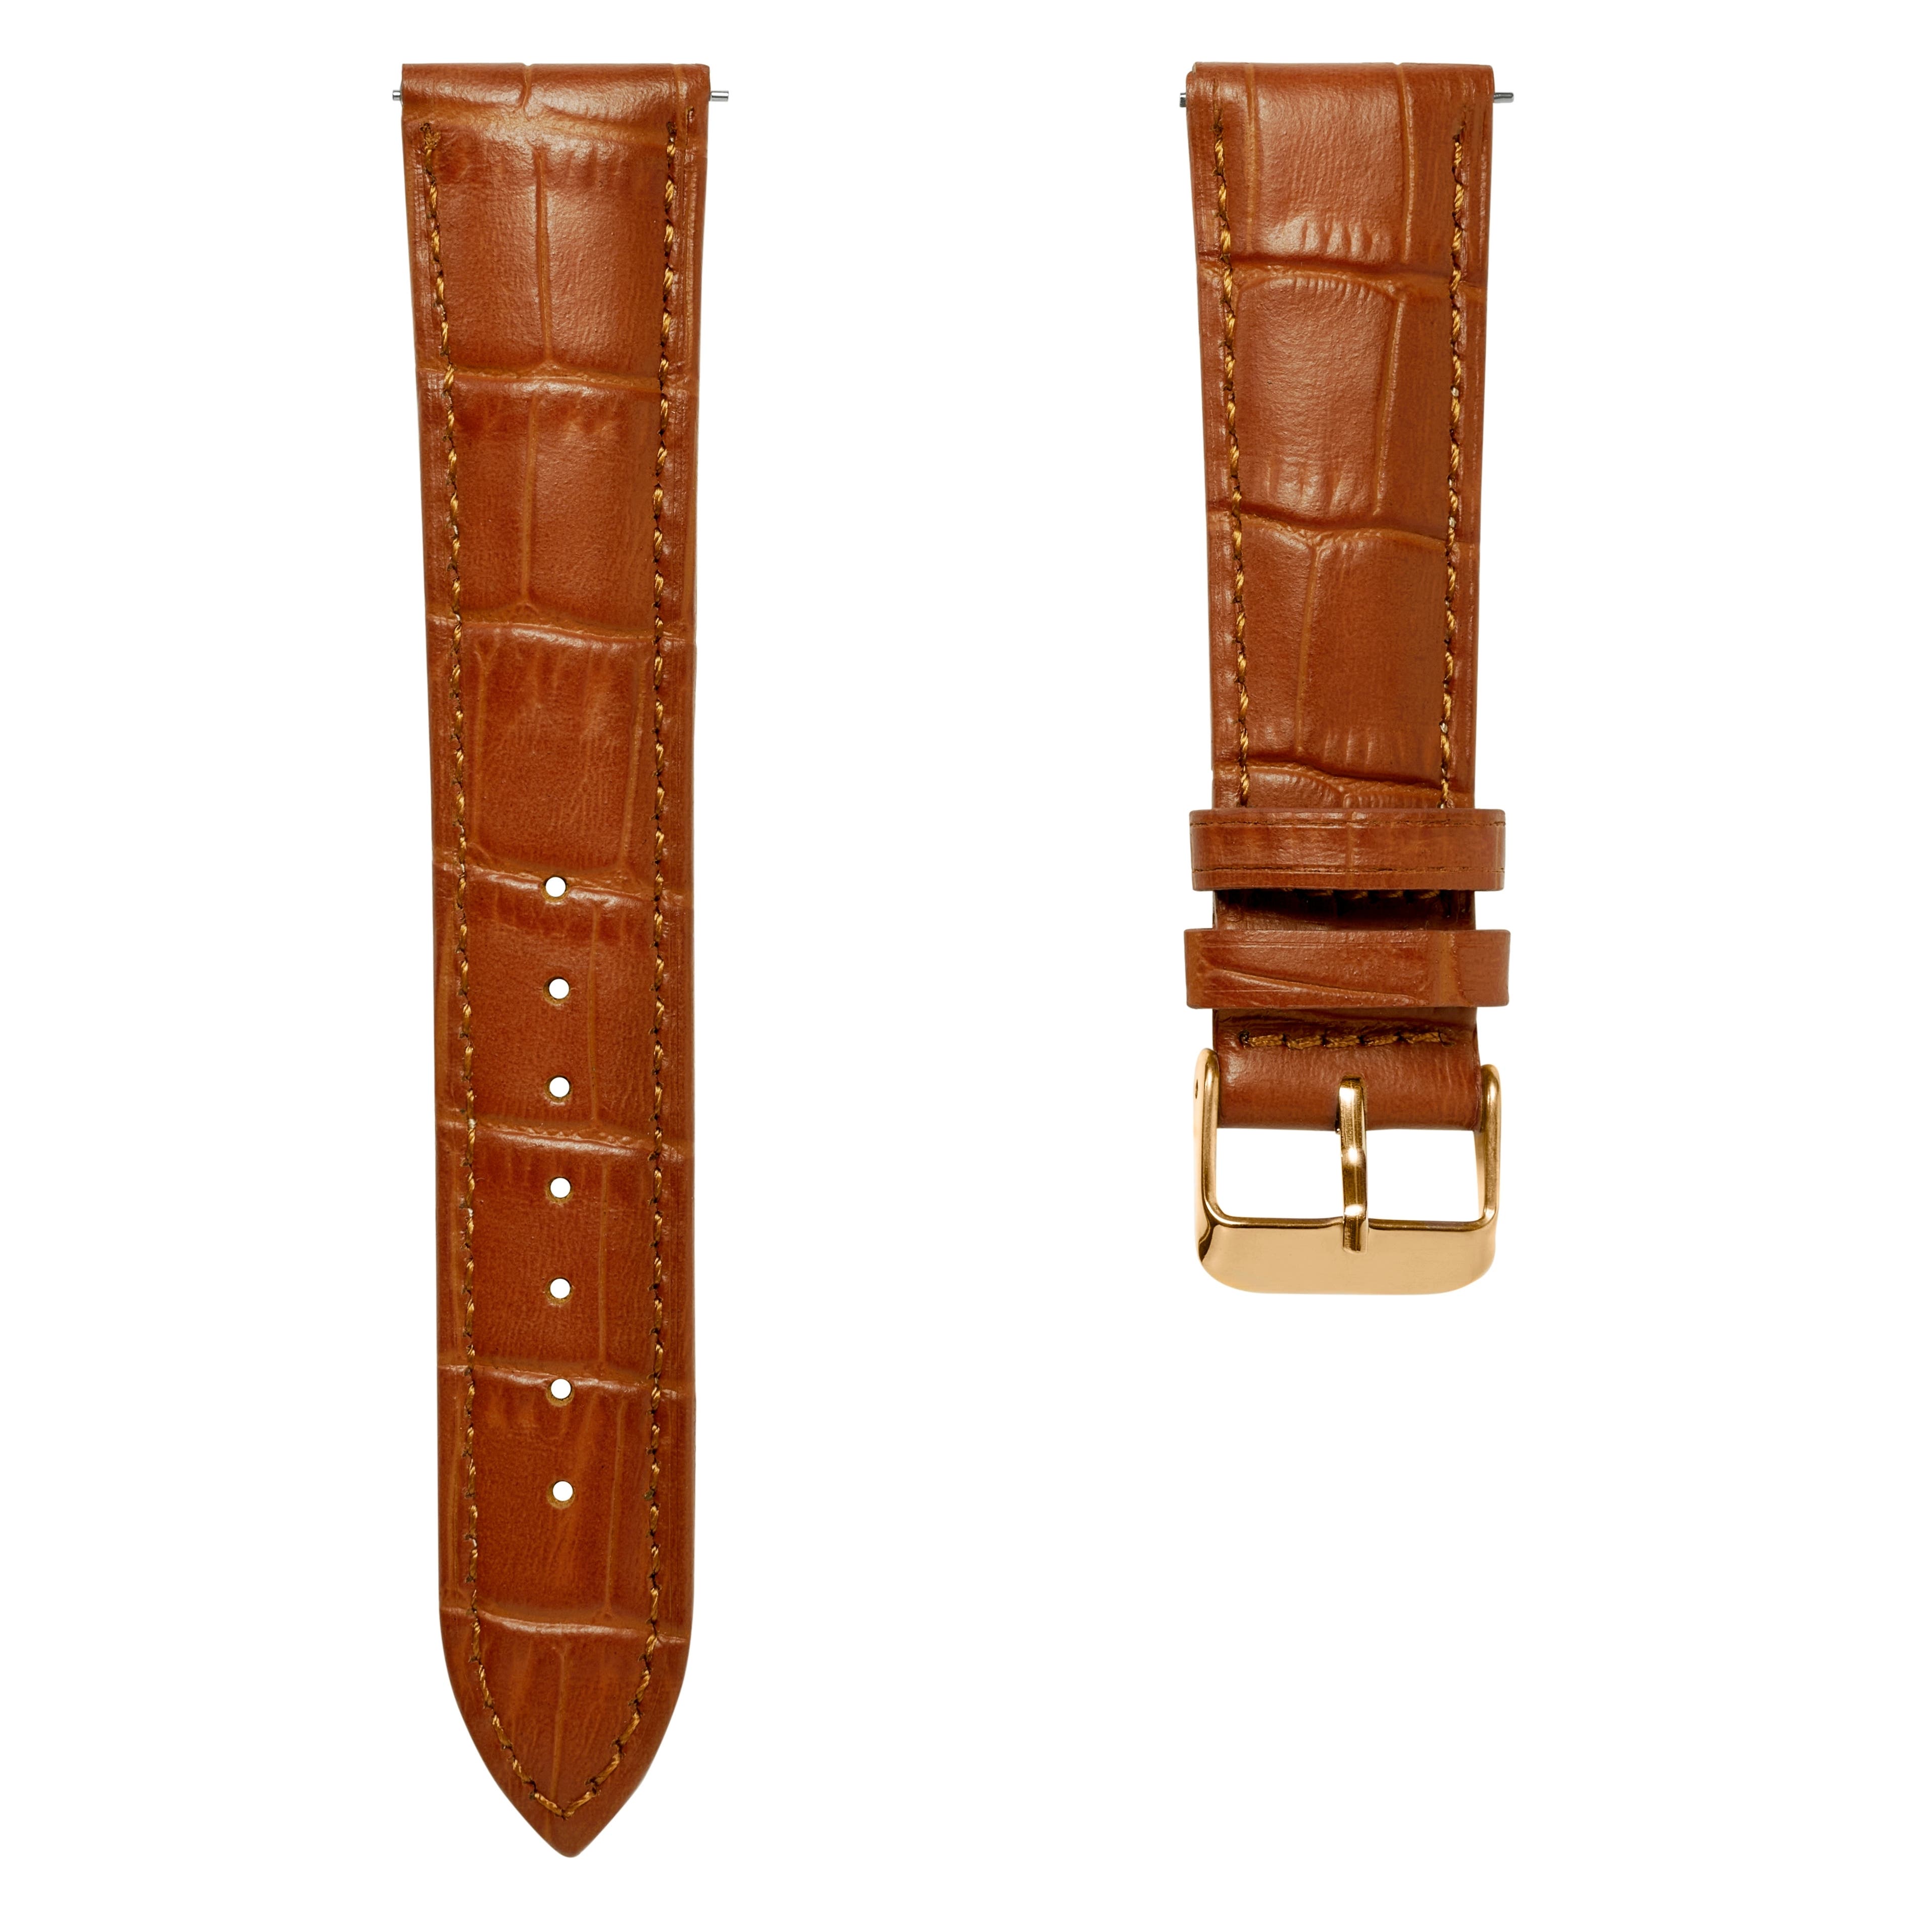 7/8" (22 mm) Crocodile-Embossed Tan Leather Watch Strap with Rose Gold-Tone Buckle – Quick Release